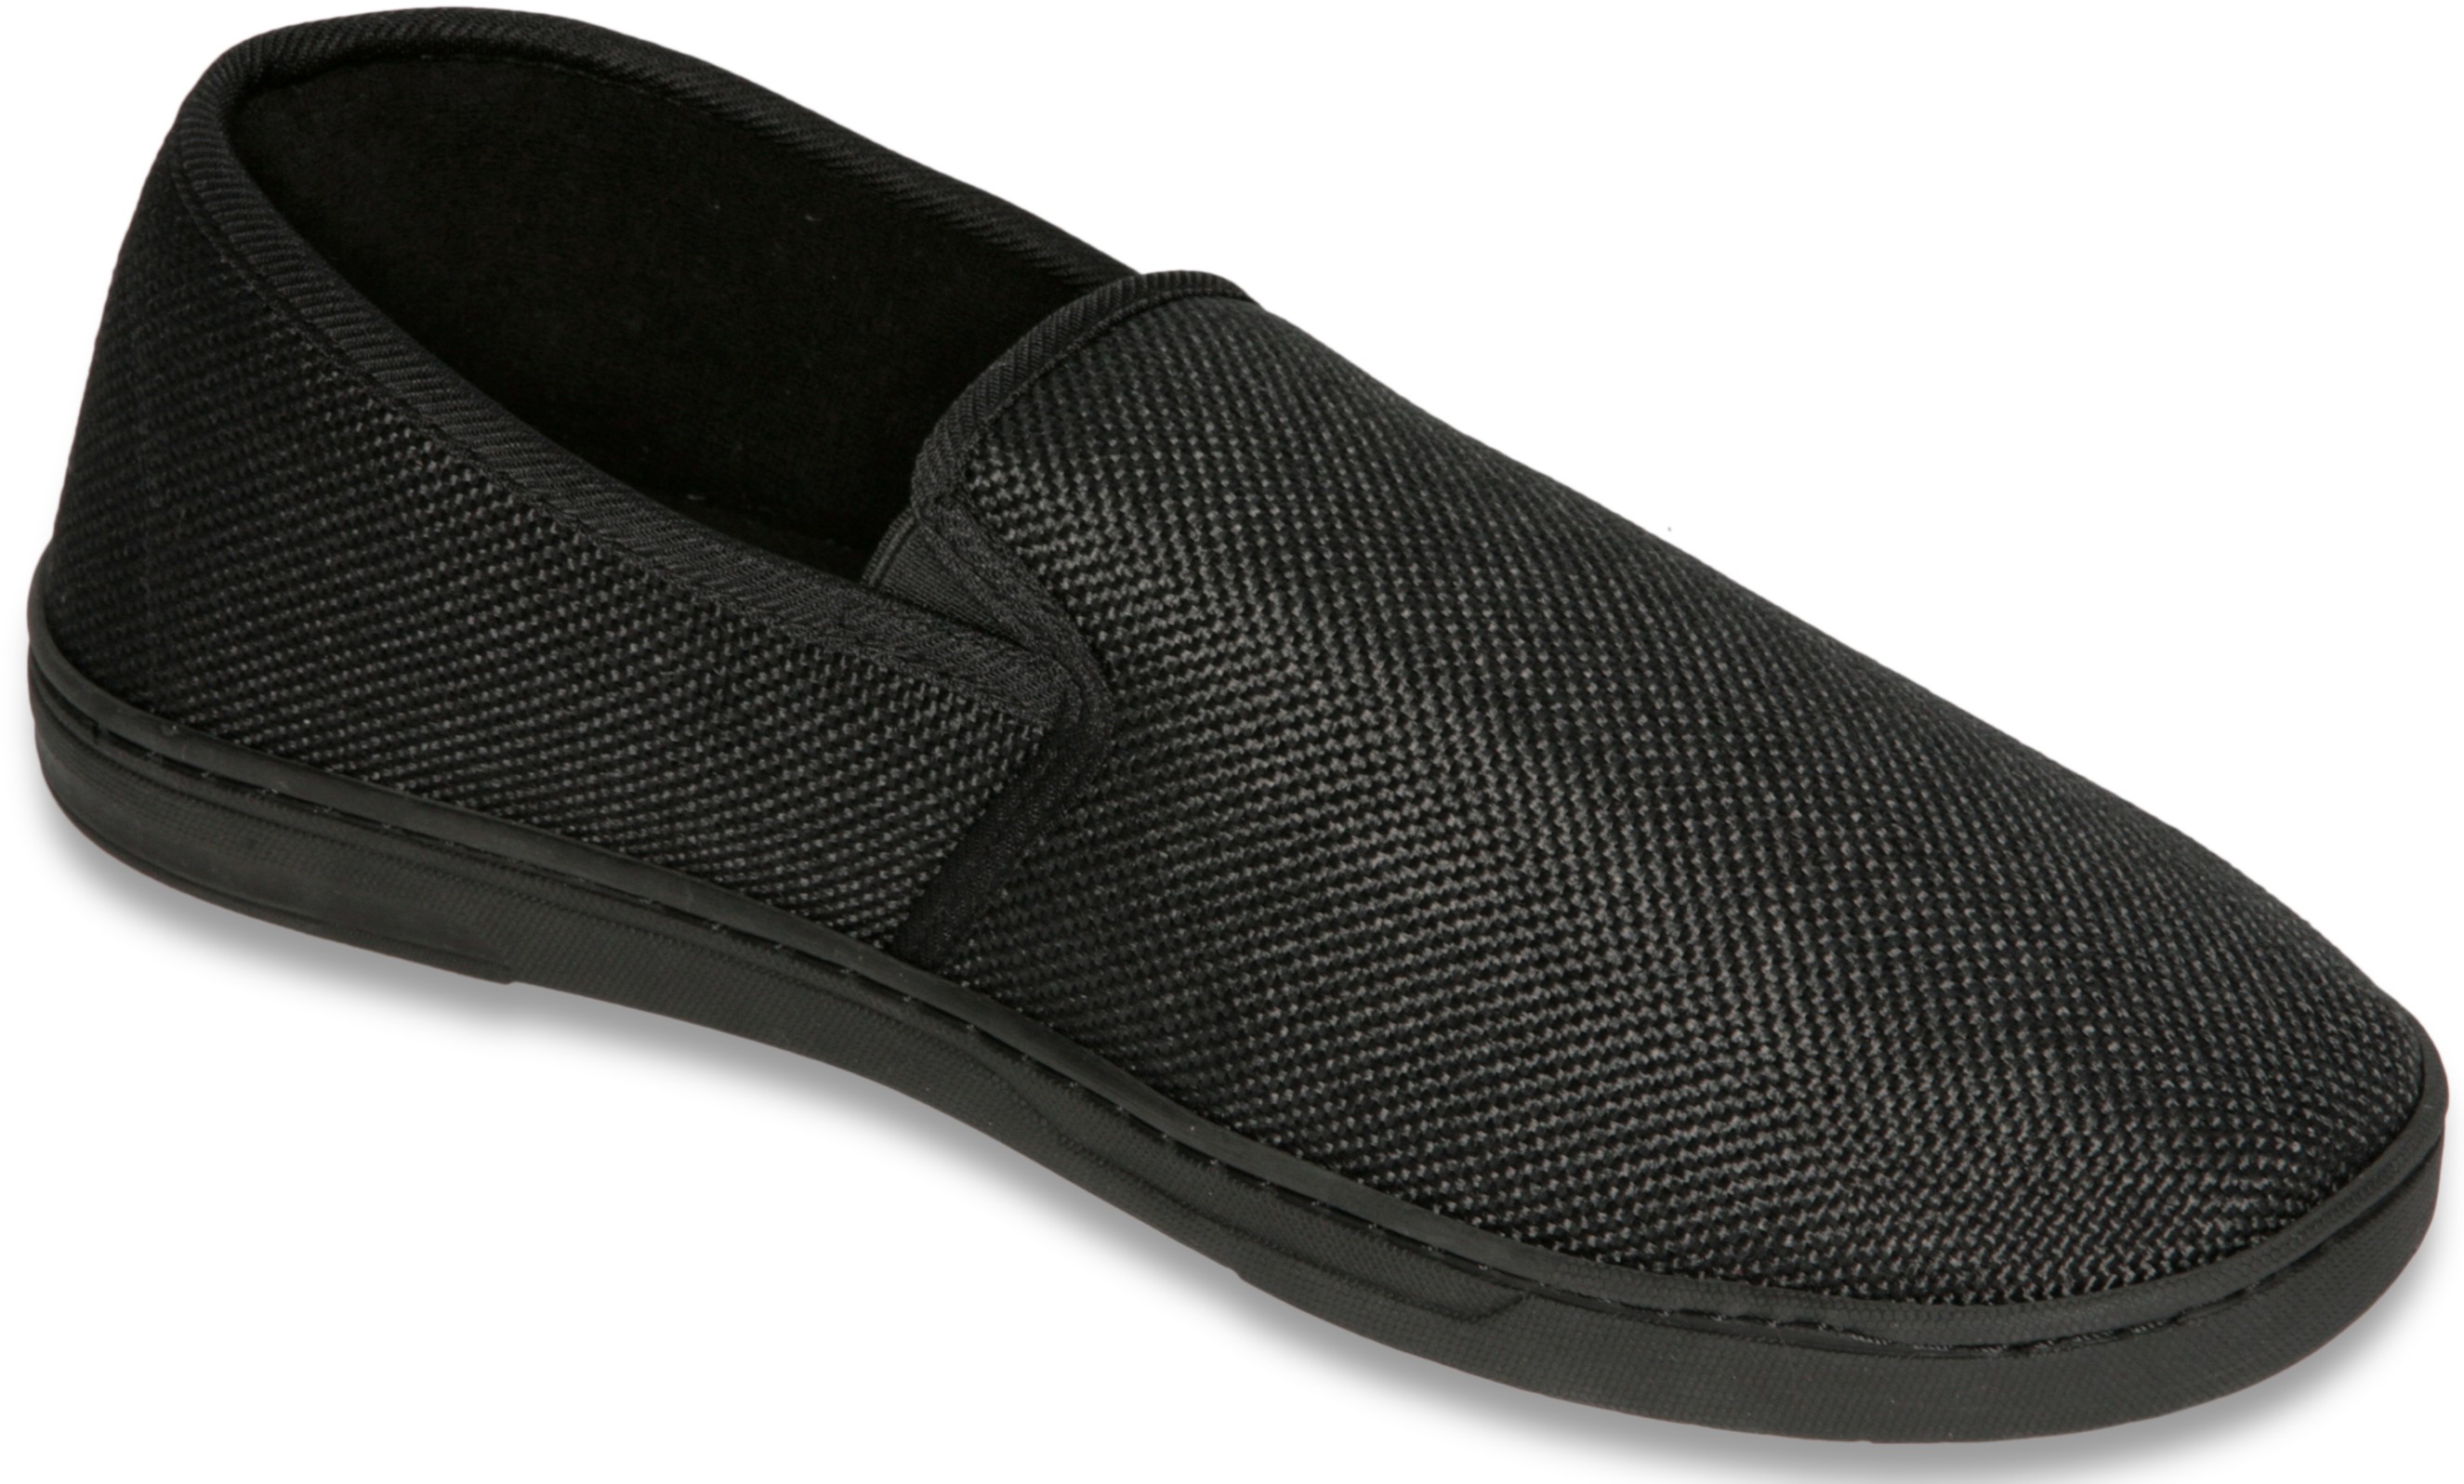 Mens Leather Slippers with Memory Foam Insole M006 